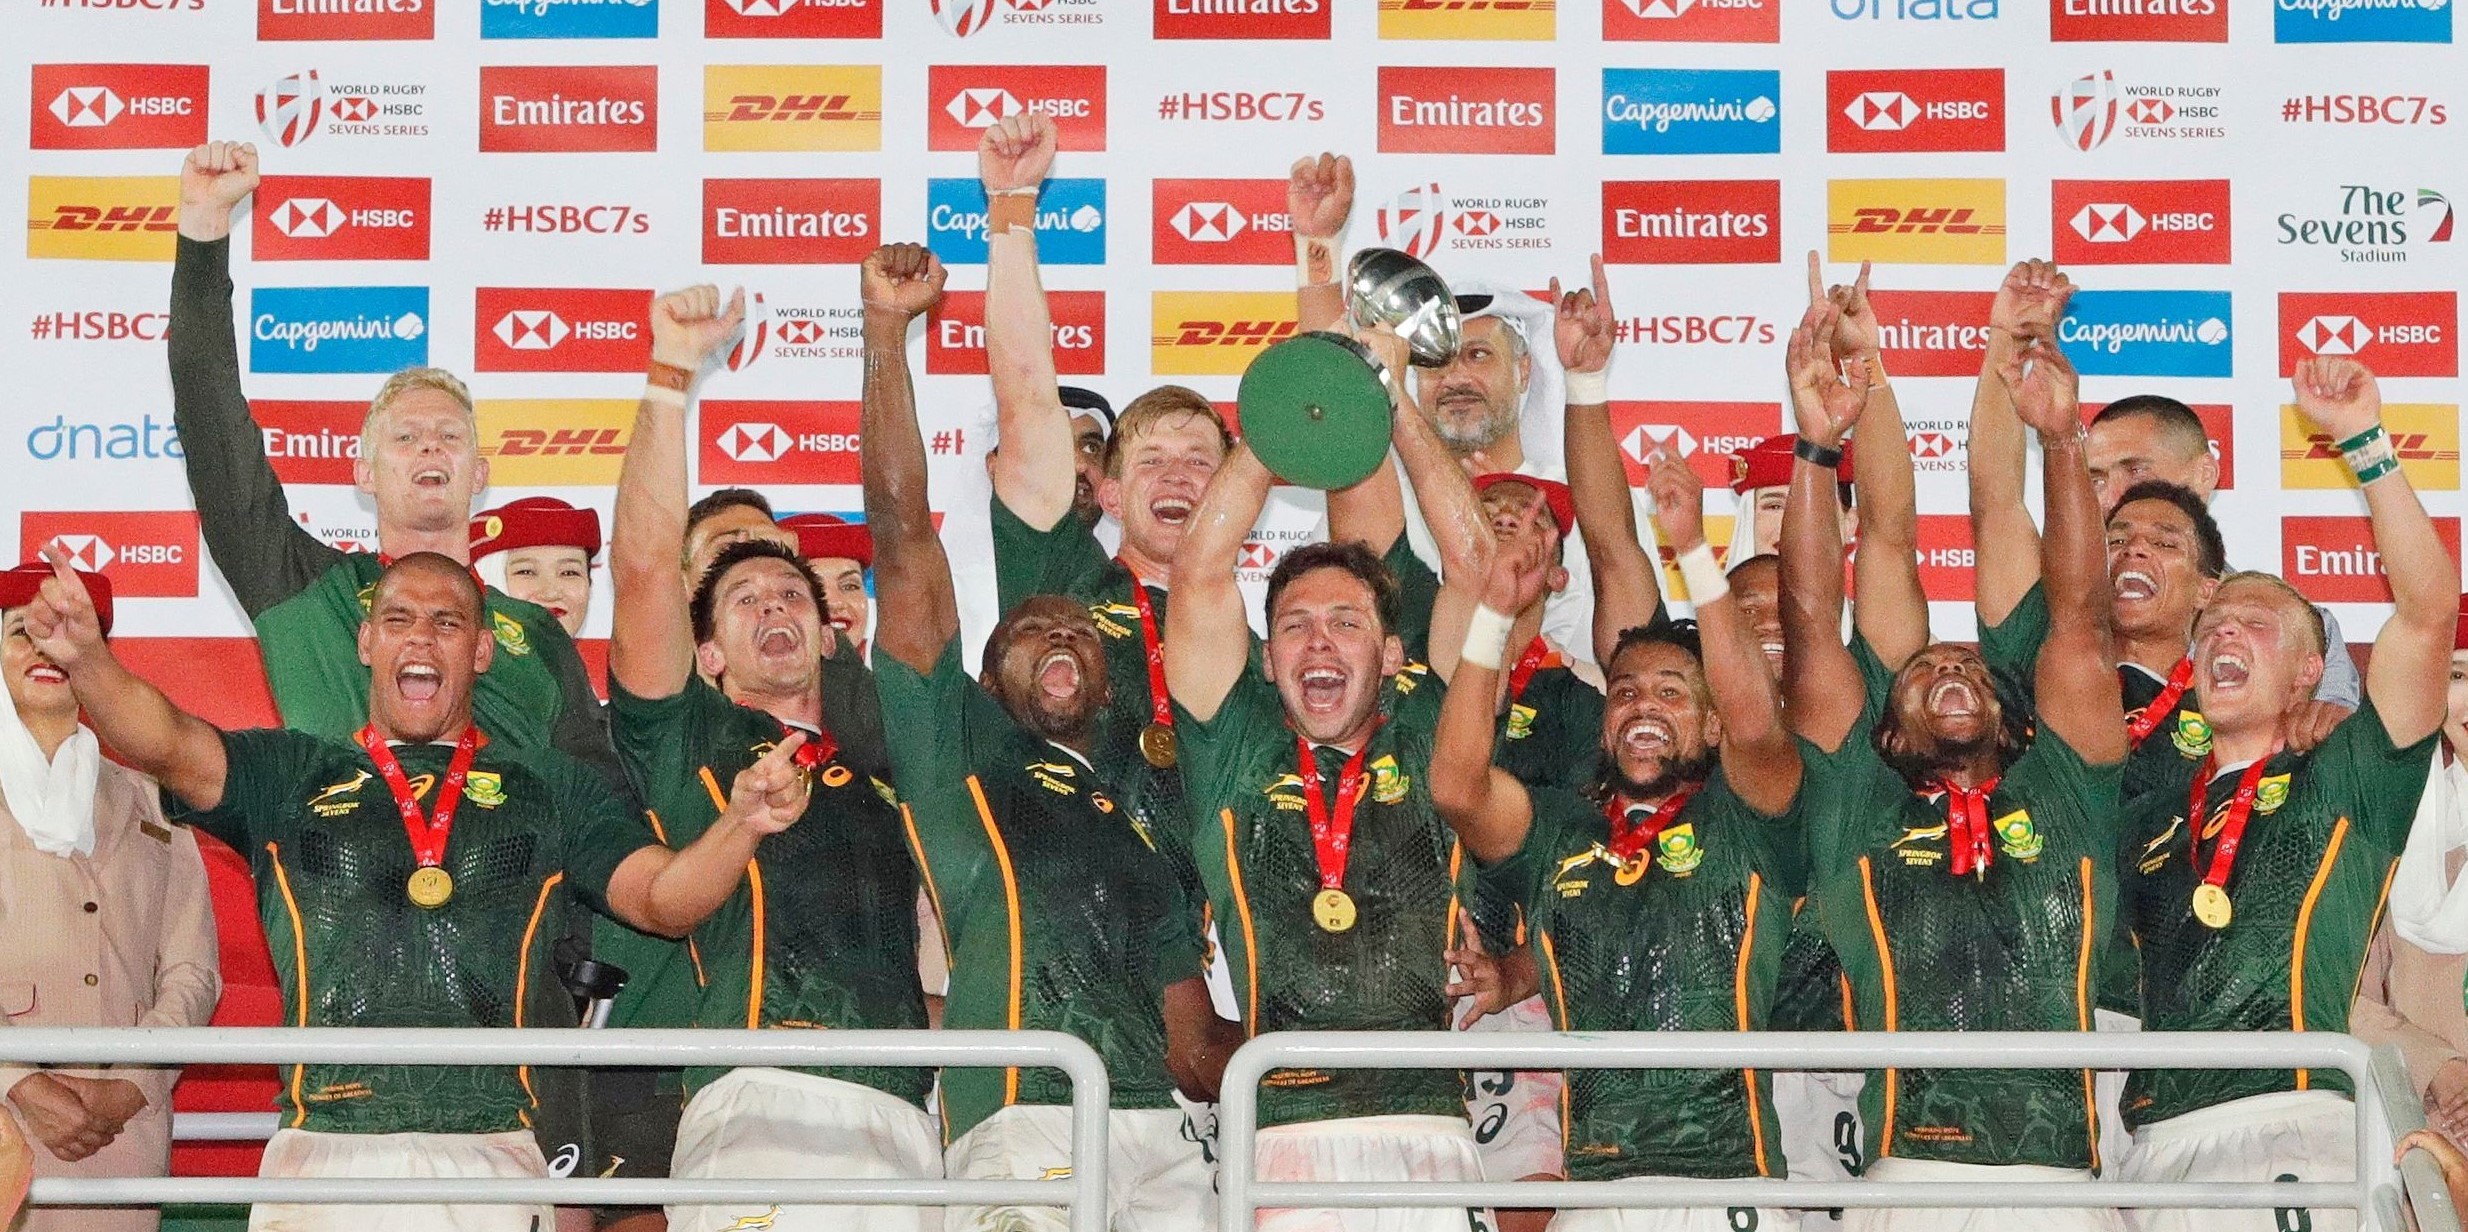 South Africa celebrate winning the Cup on day two of the Dubai Emirates Airline Rugby Sevens 2021 women's competition on 27 November, 2021. Photo credit: Mike Lee - KLC fotos for World Rugby/BackpagePix